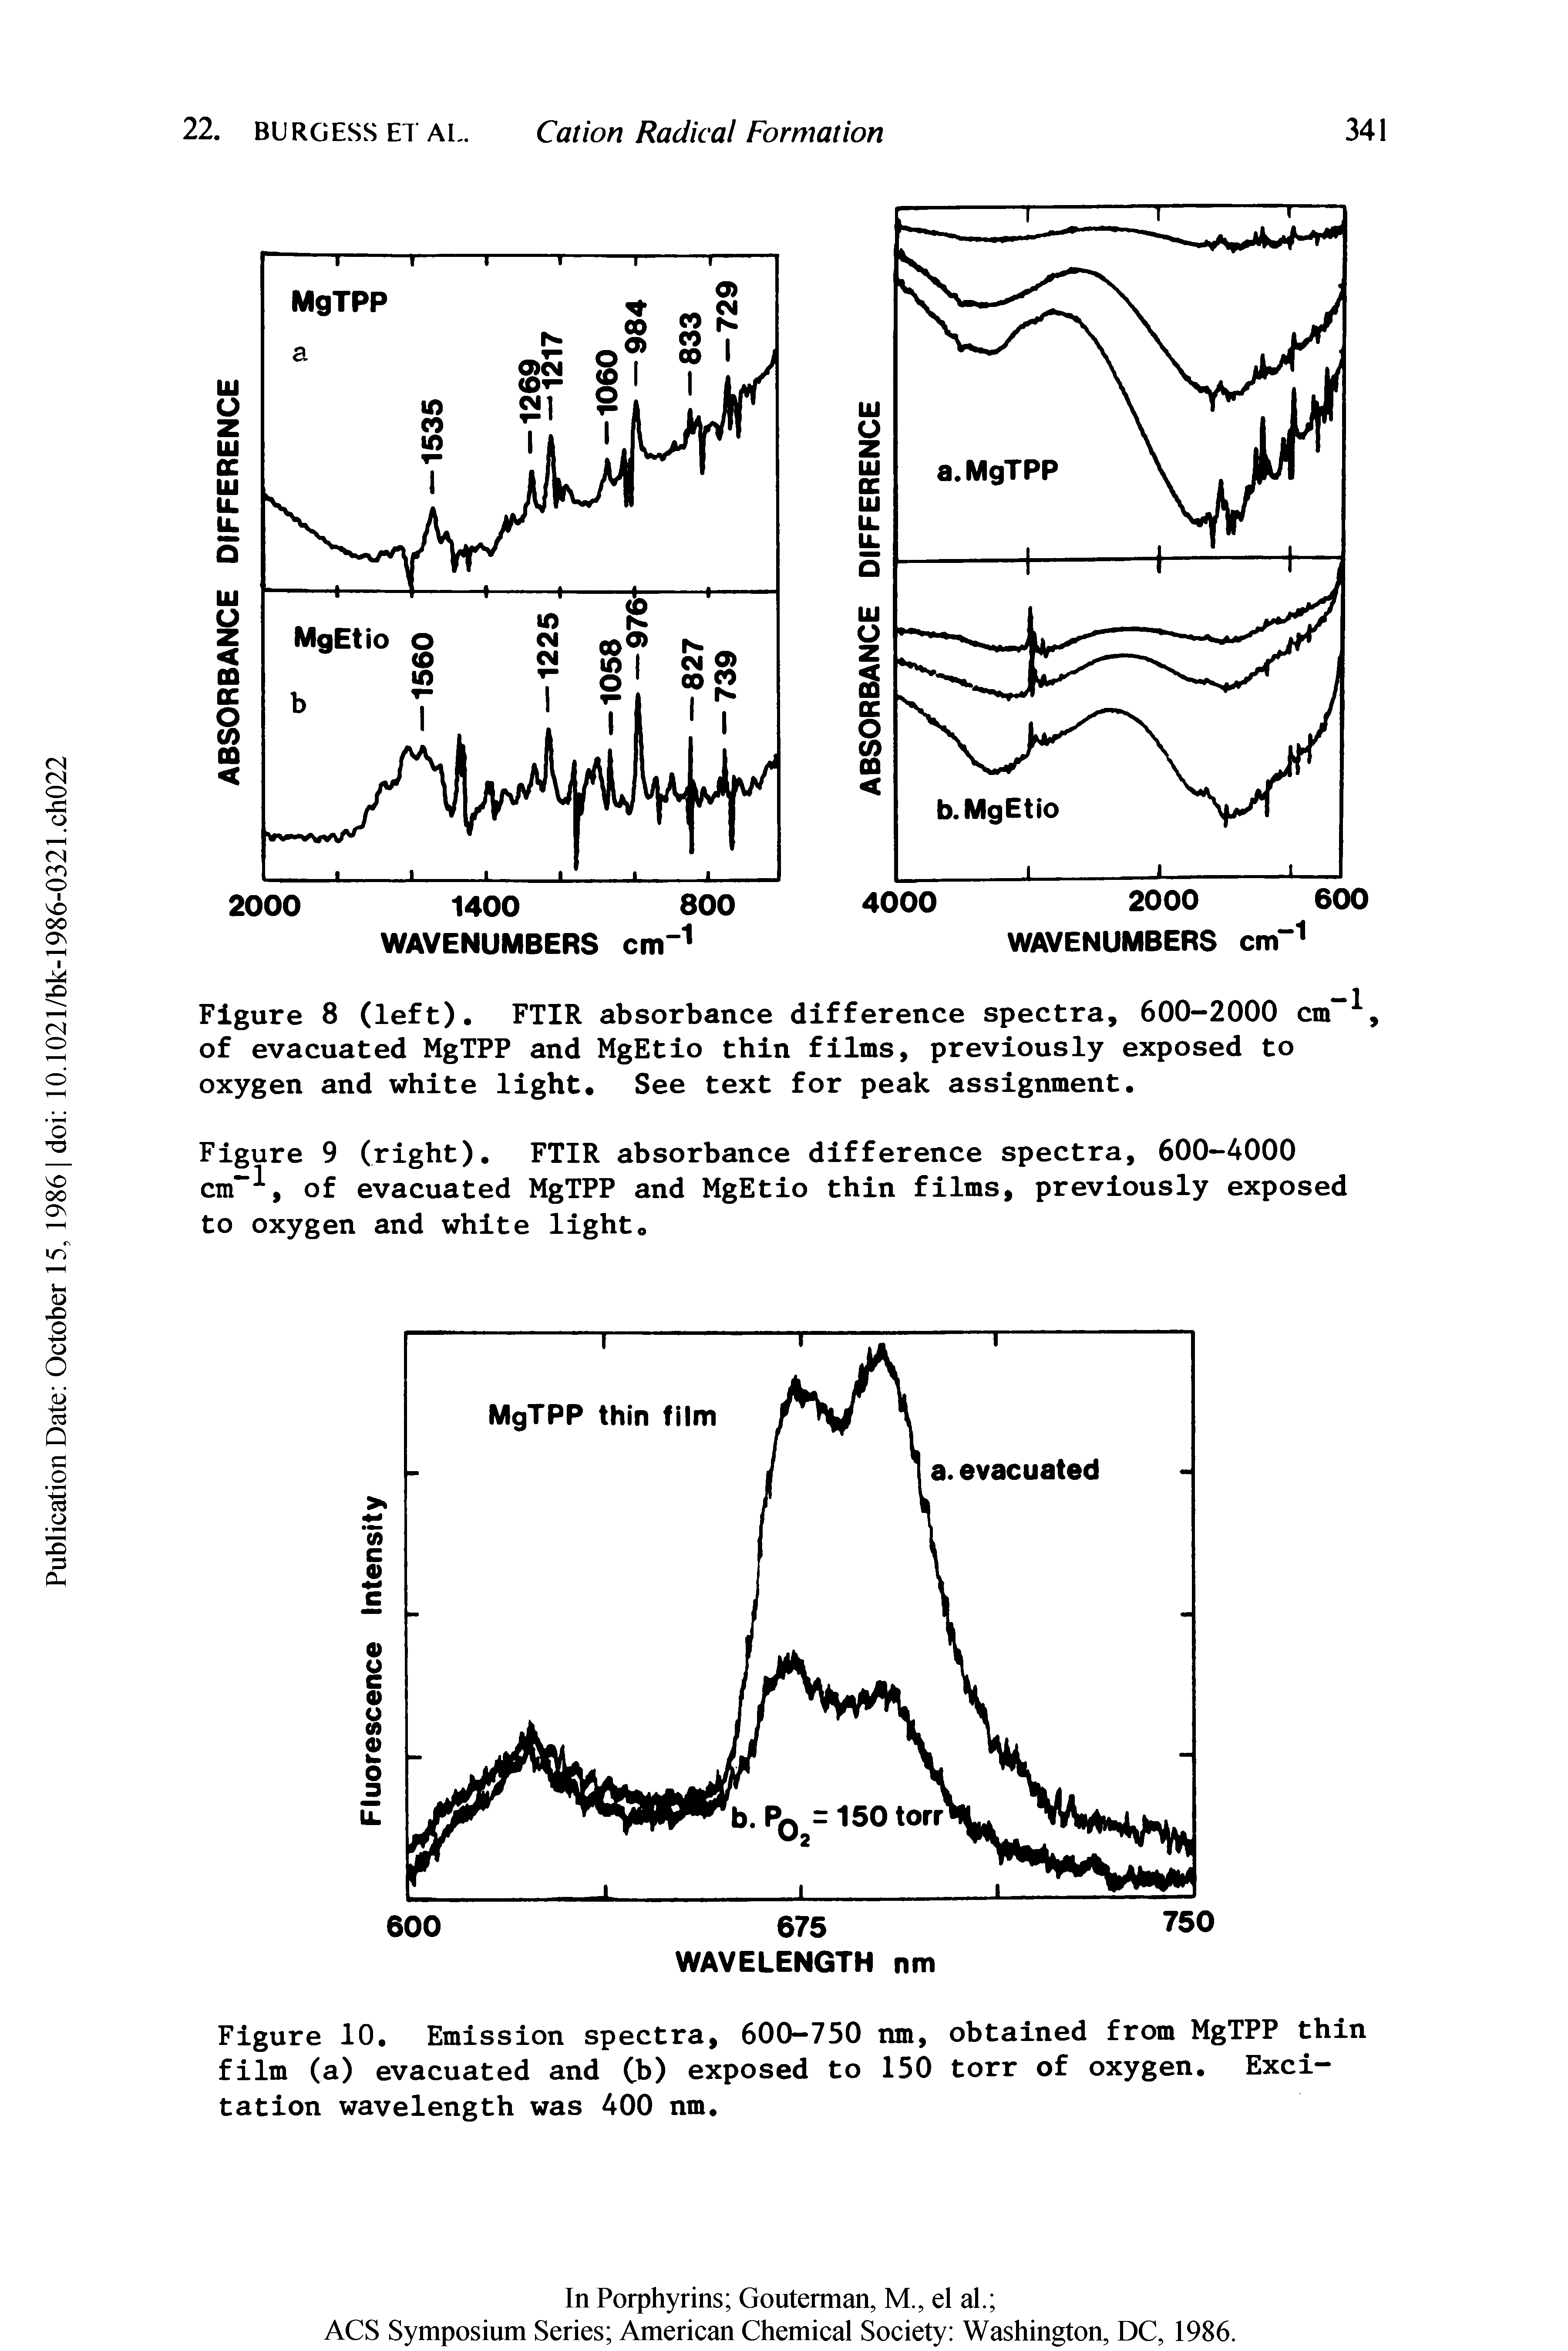 Figure 10. Emission spectra, 600-750 nm, obtained from MgTPP thin film (a) evacuated and Cb) exposed to 150 torr of oxygen. Excitation wavelength was 400 nm.